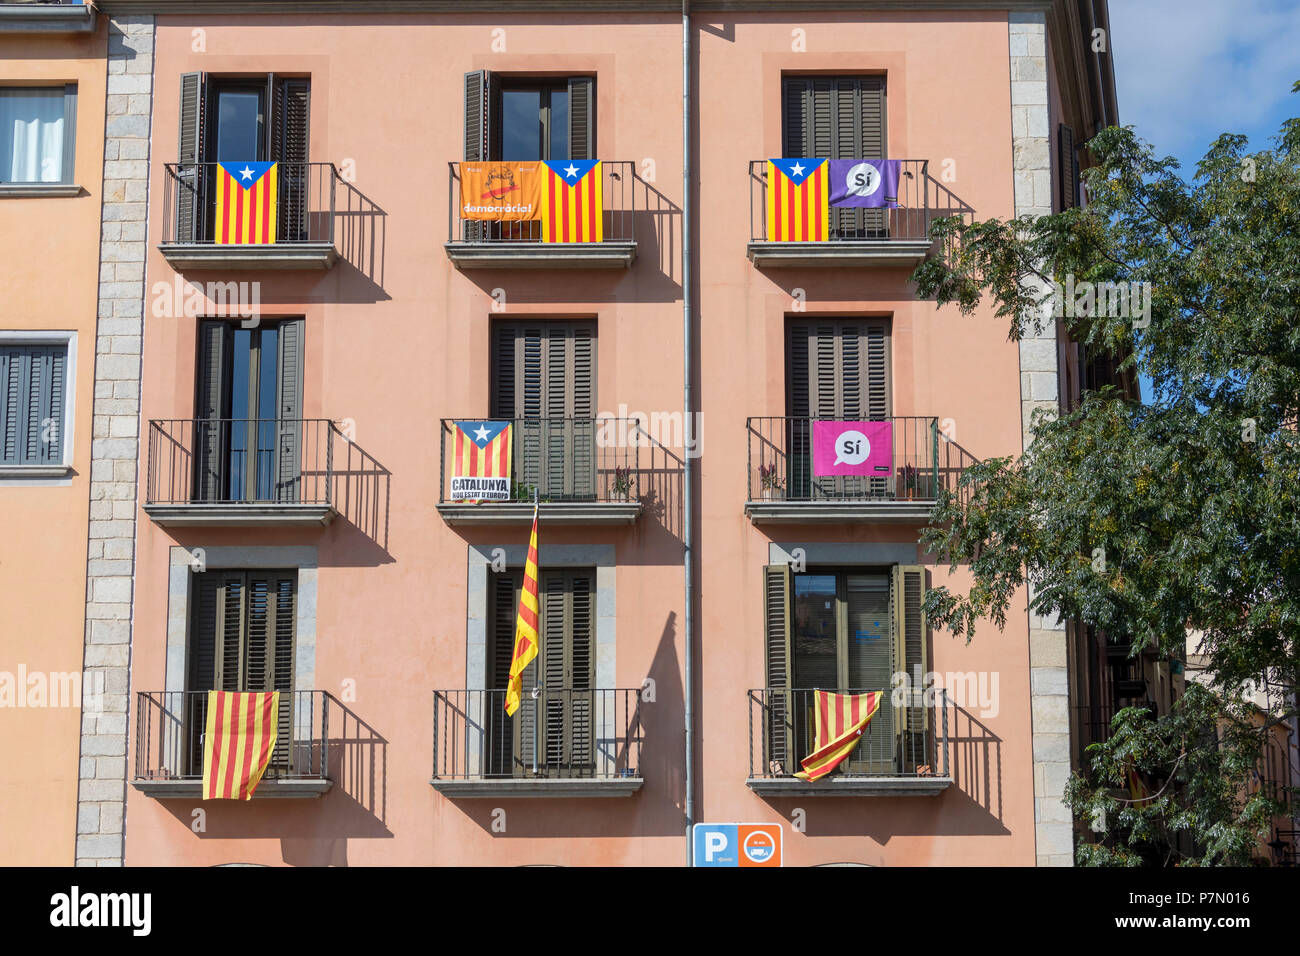 Catalan independence flags hanging from balconies, Girona, Catalonia, Spain Stock Photo